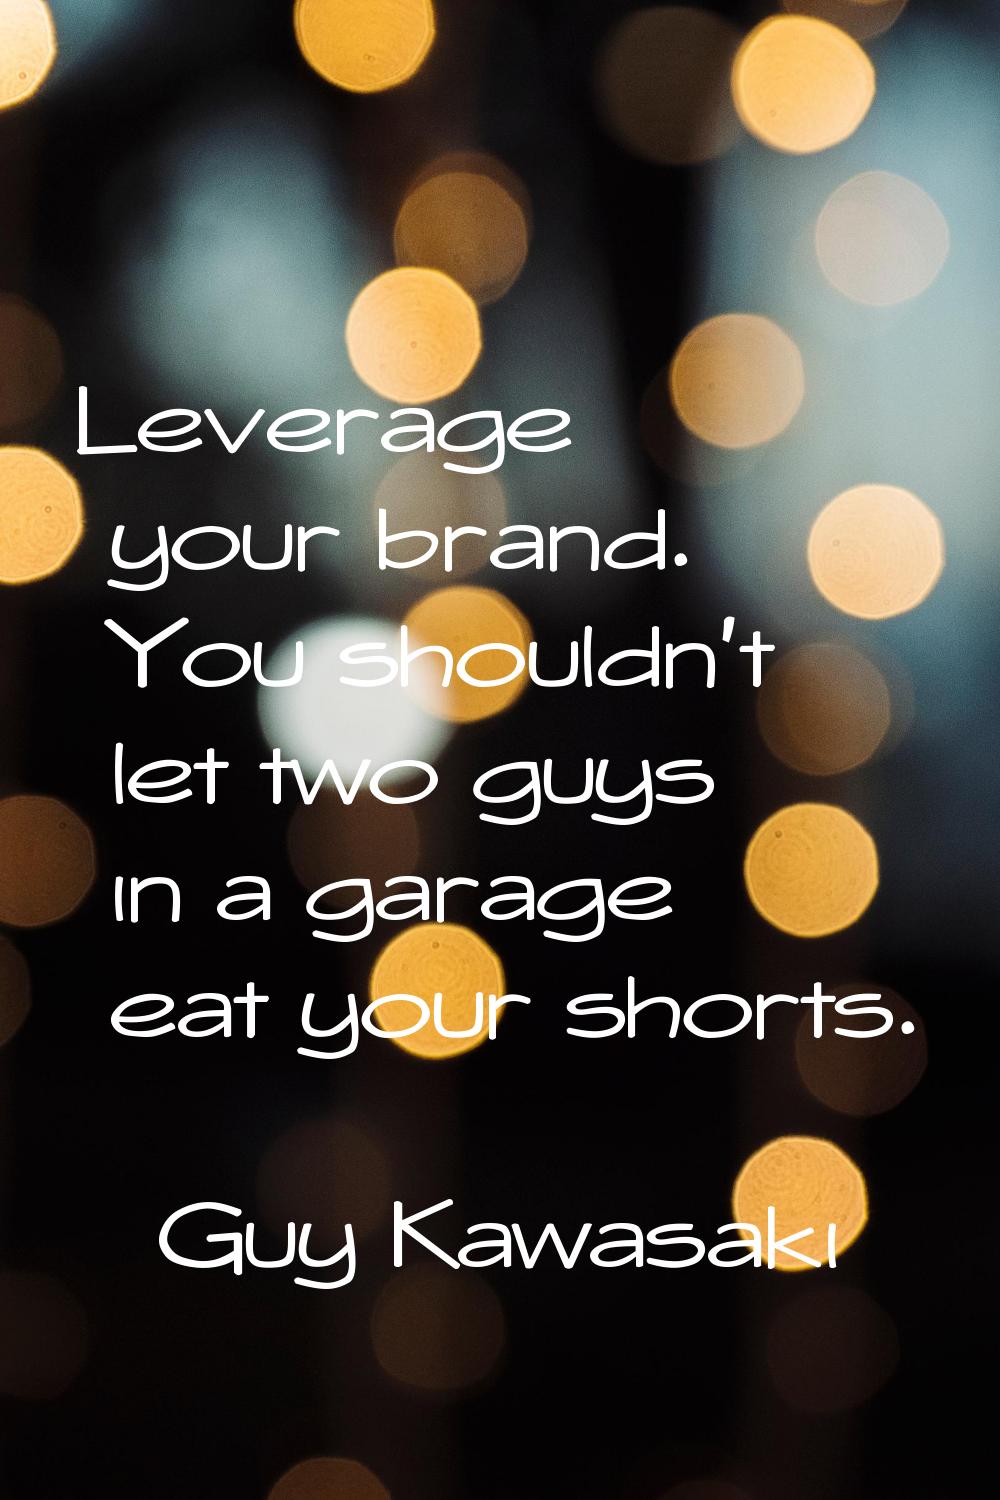 Leverage your brand. You shouldn't let two guys in a garage eat your shorts.